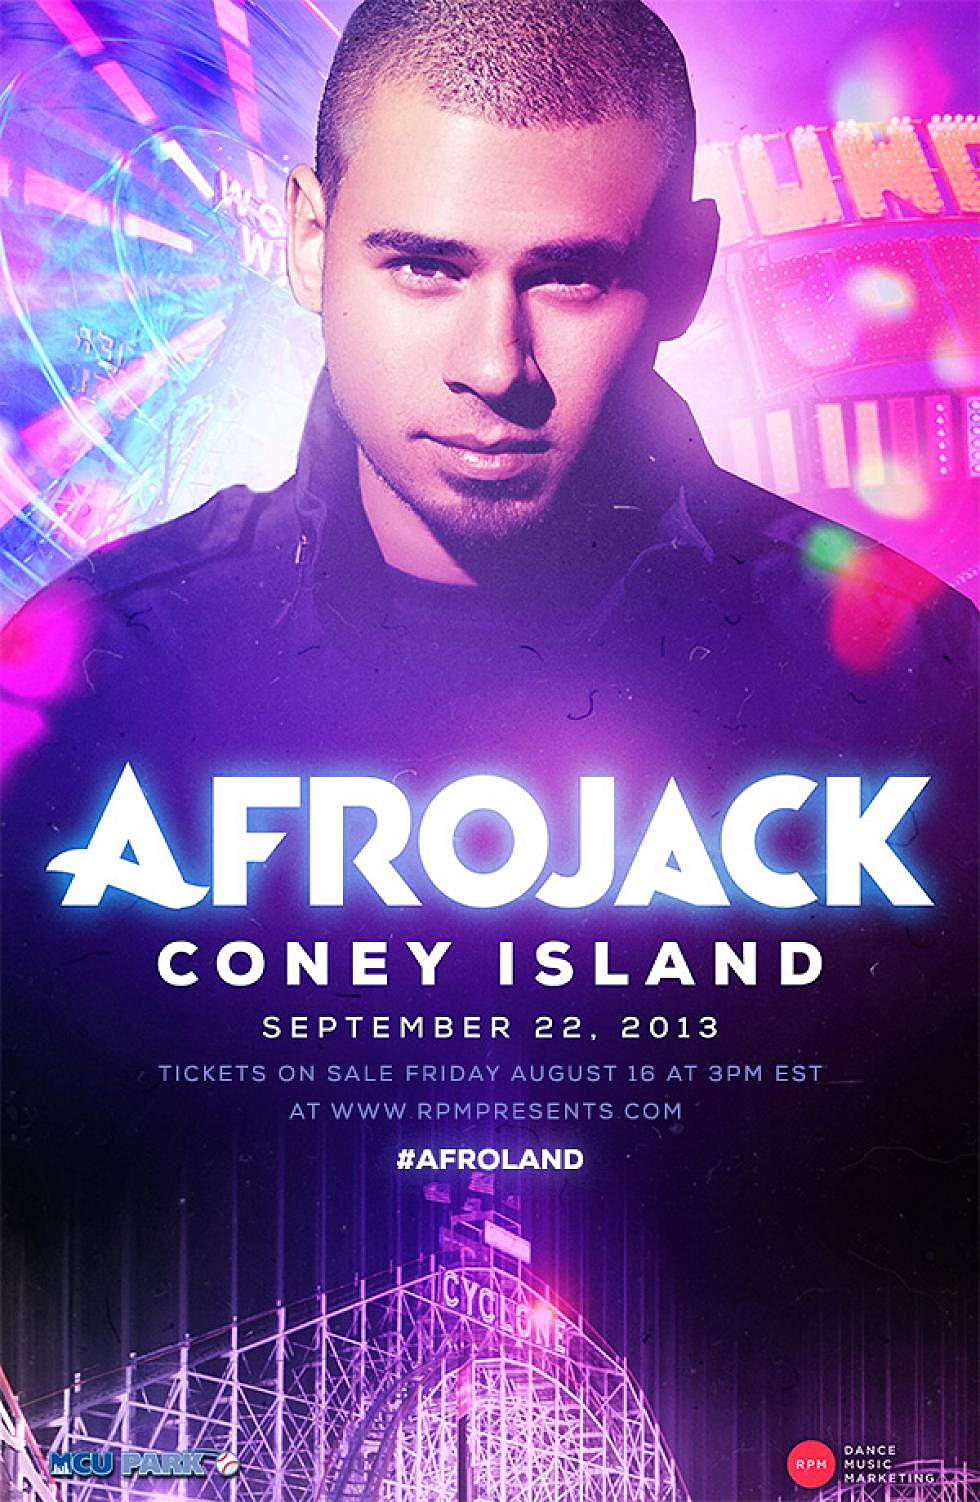 Afrojack to perform at MCU Park in Coney Island, NY, September 22nd